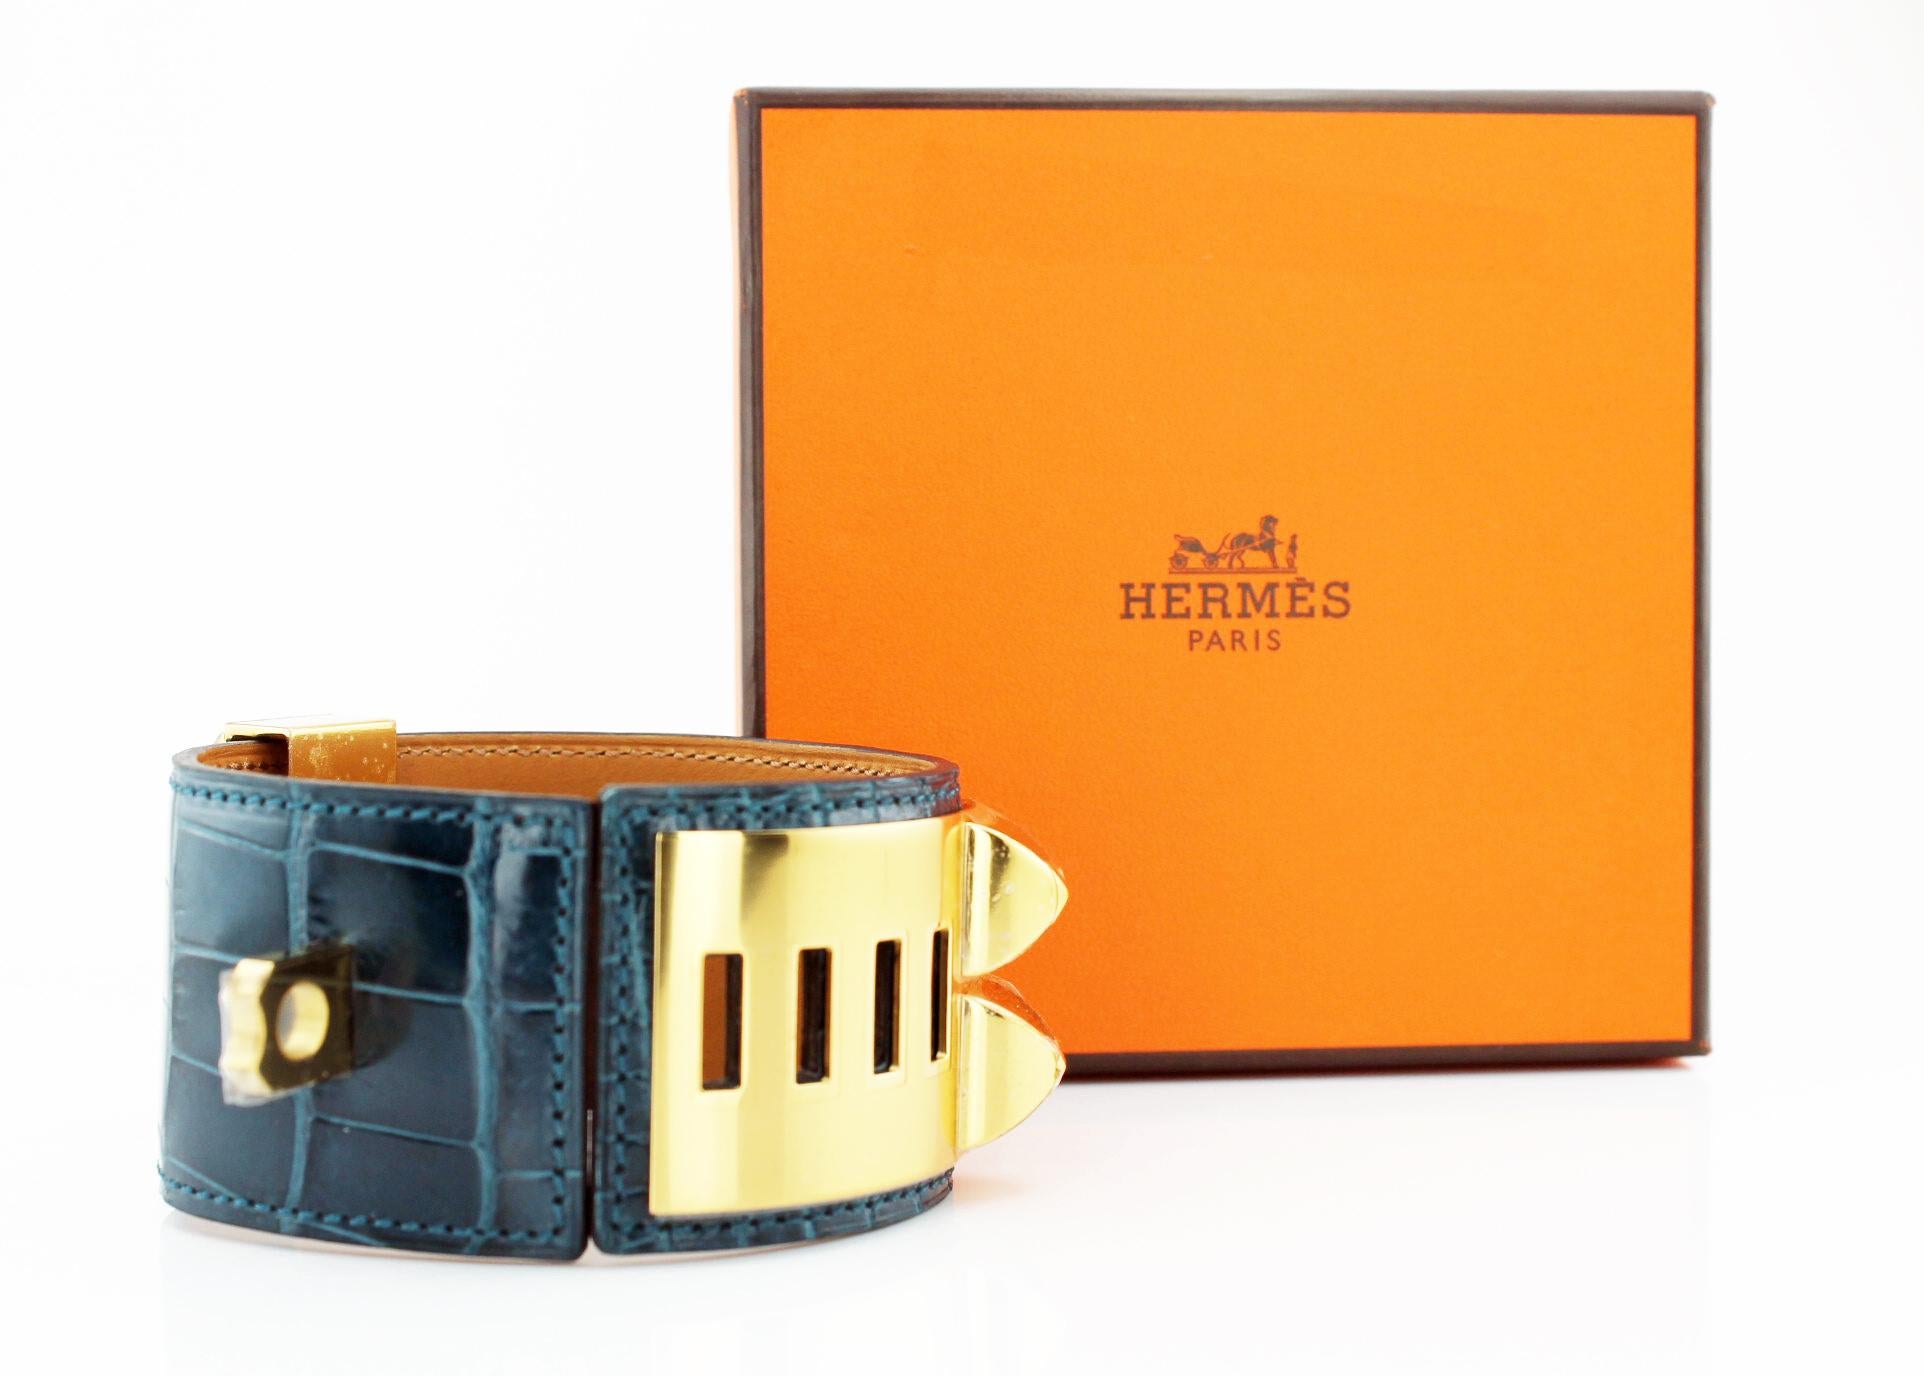 Hermes Collier De Chien Crocodile Cuff
Blue crocodile cuff with gold plated pyramid studs and ring.
New with stickers.
Original pouch and box
Size: Small
RRP £1,700